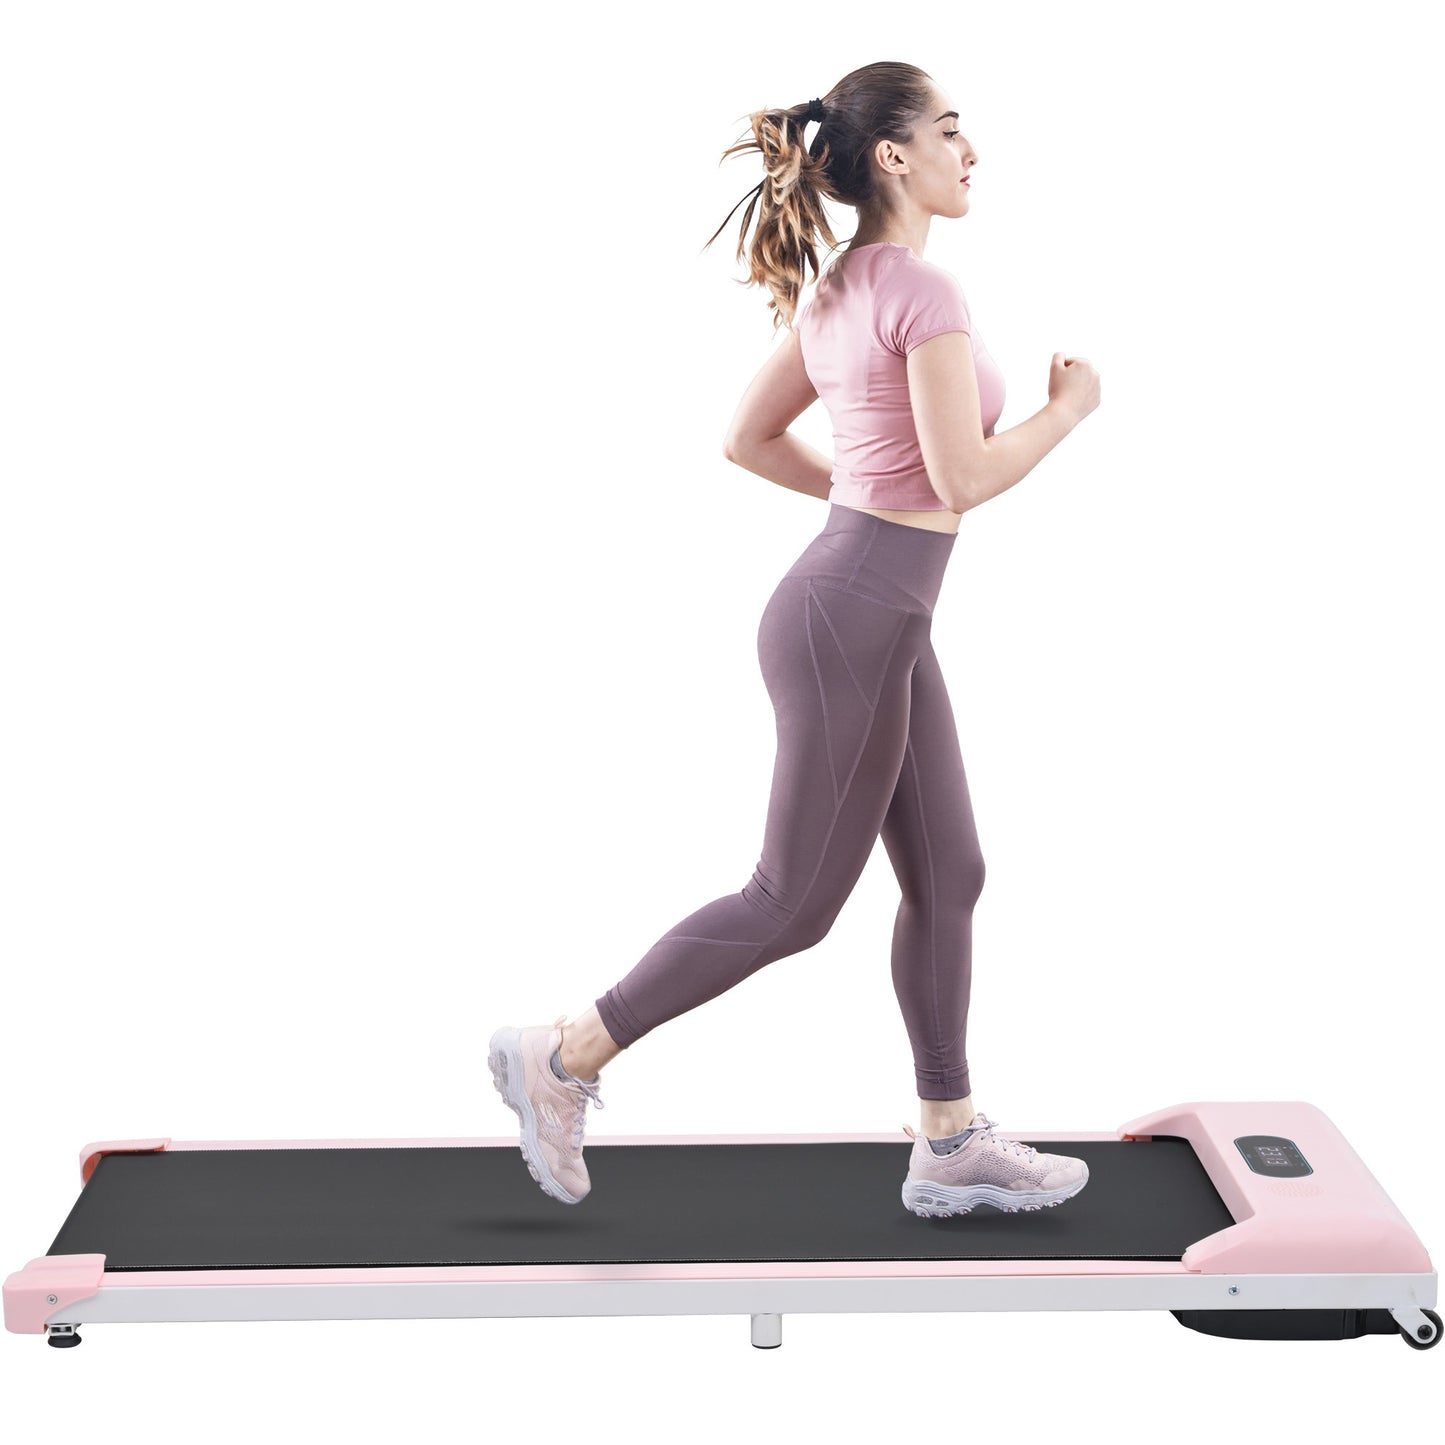 2 in 1 Under Desk Electric Treadmill 2.5HP, with Bluetooth APP and speaker, Remote Control, Display, Walking Jogging Running Machine Fitness Equipment for Home Gym Office